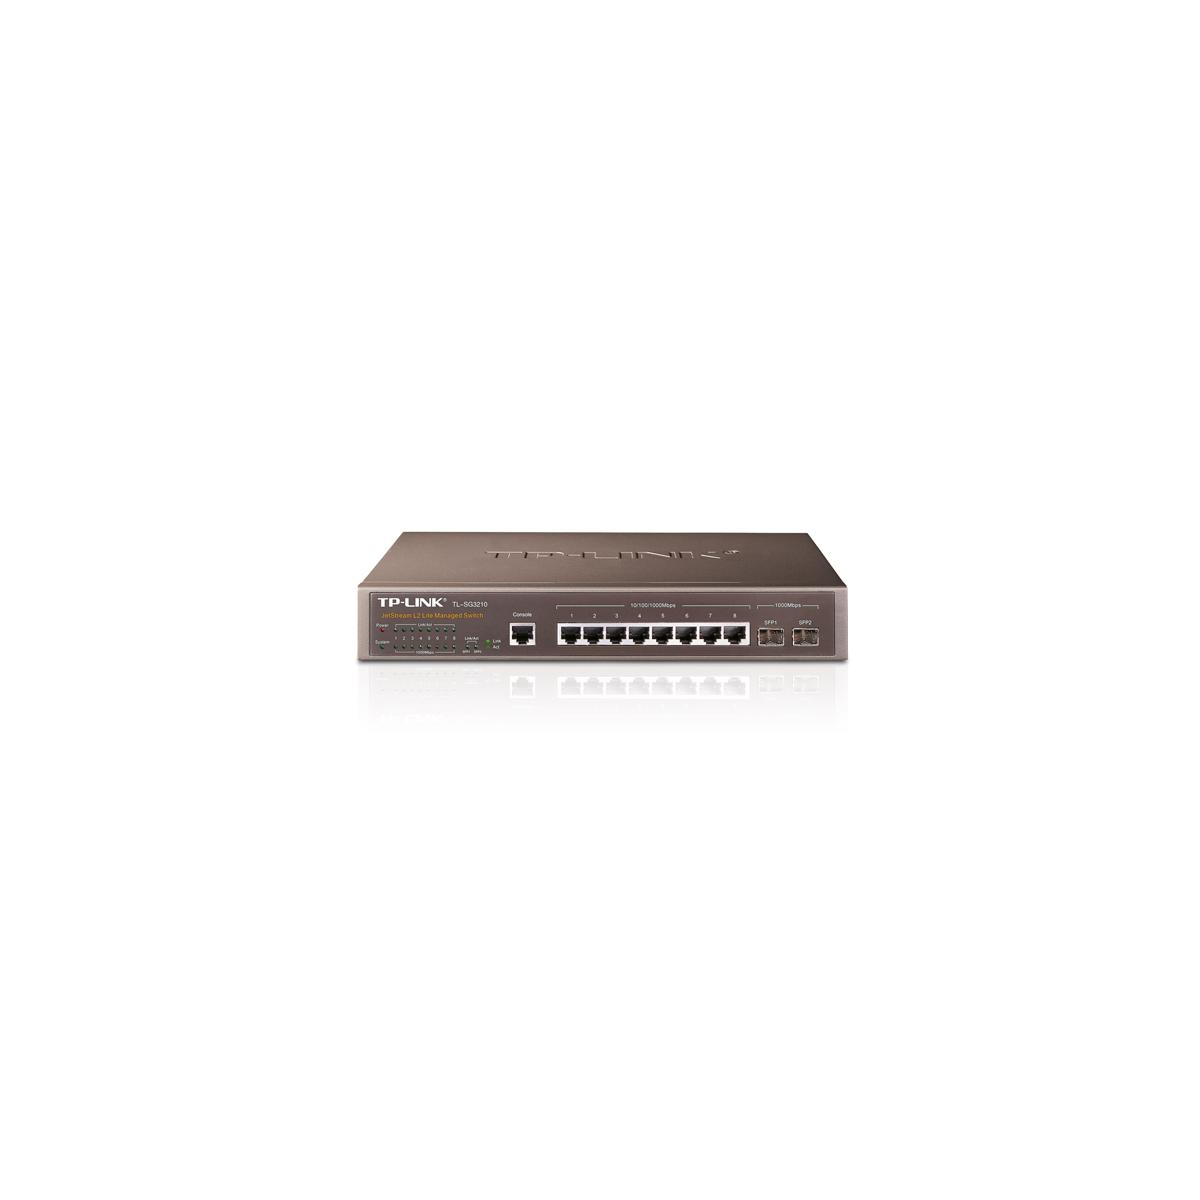 TL-SG3210 TP-LINK Switch 11